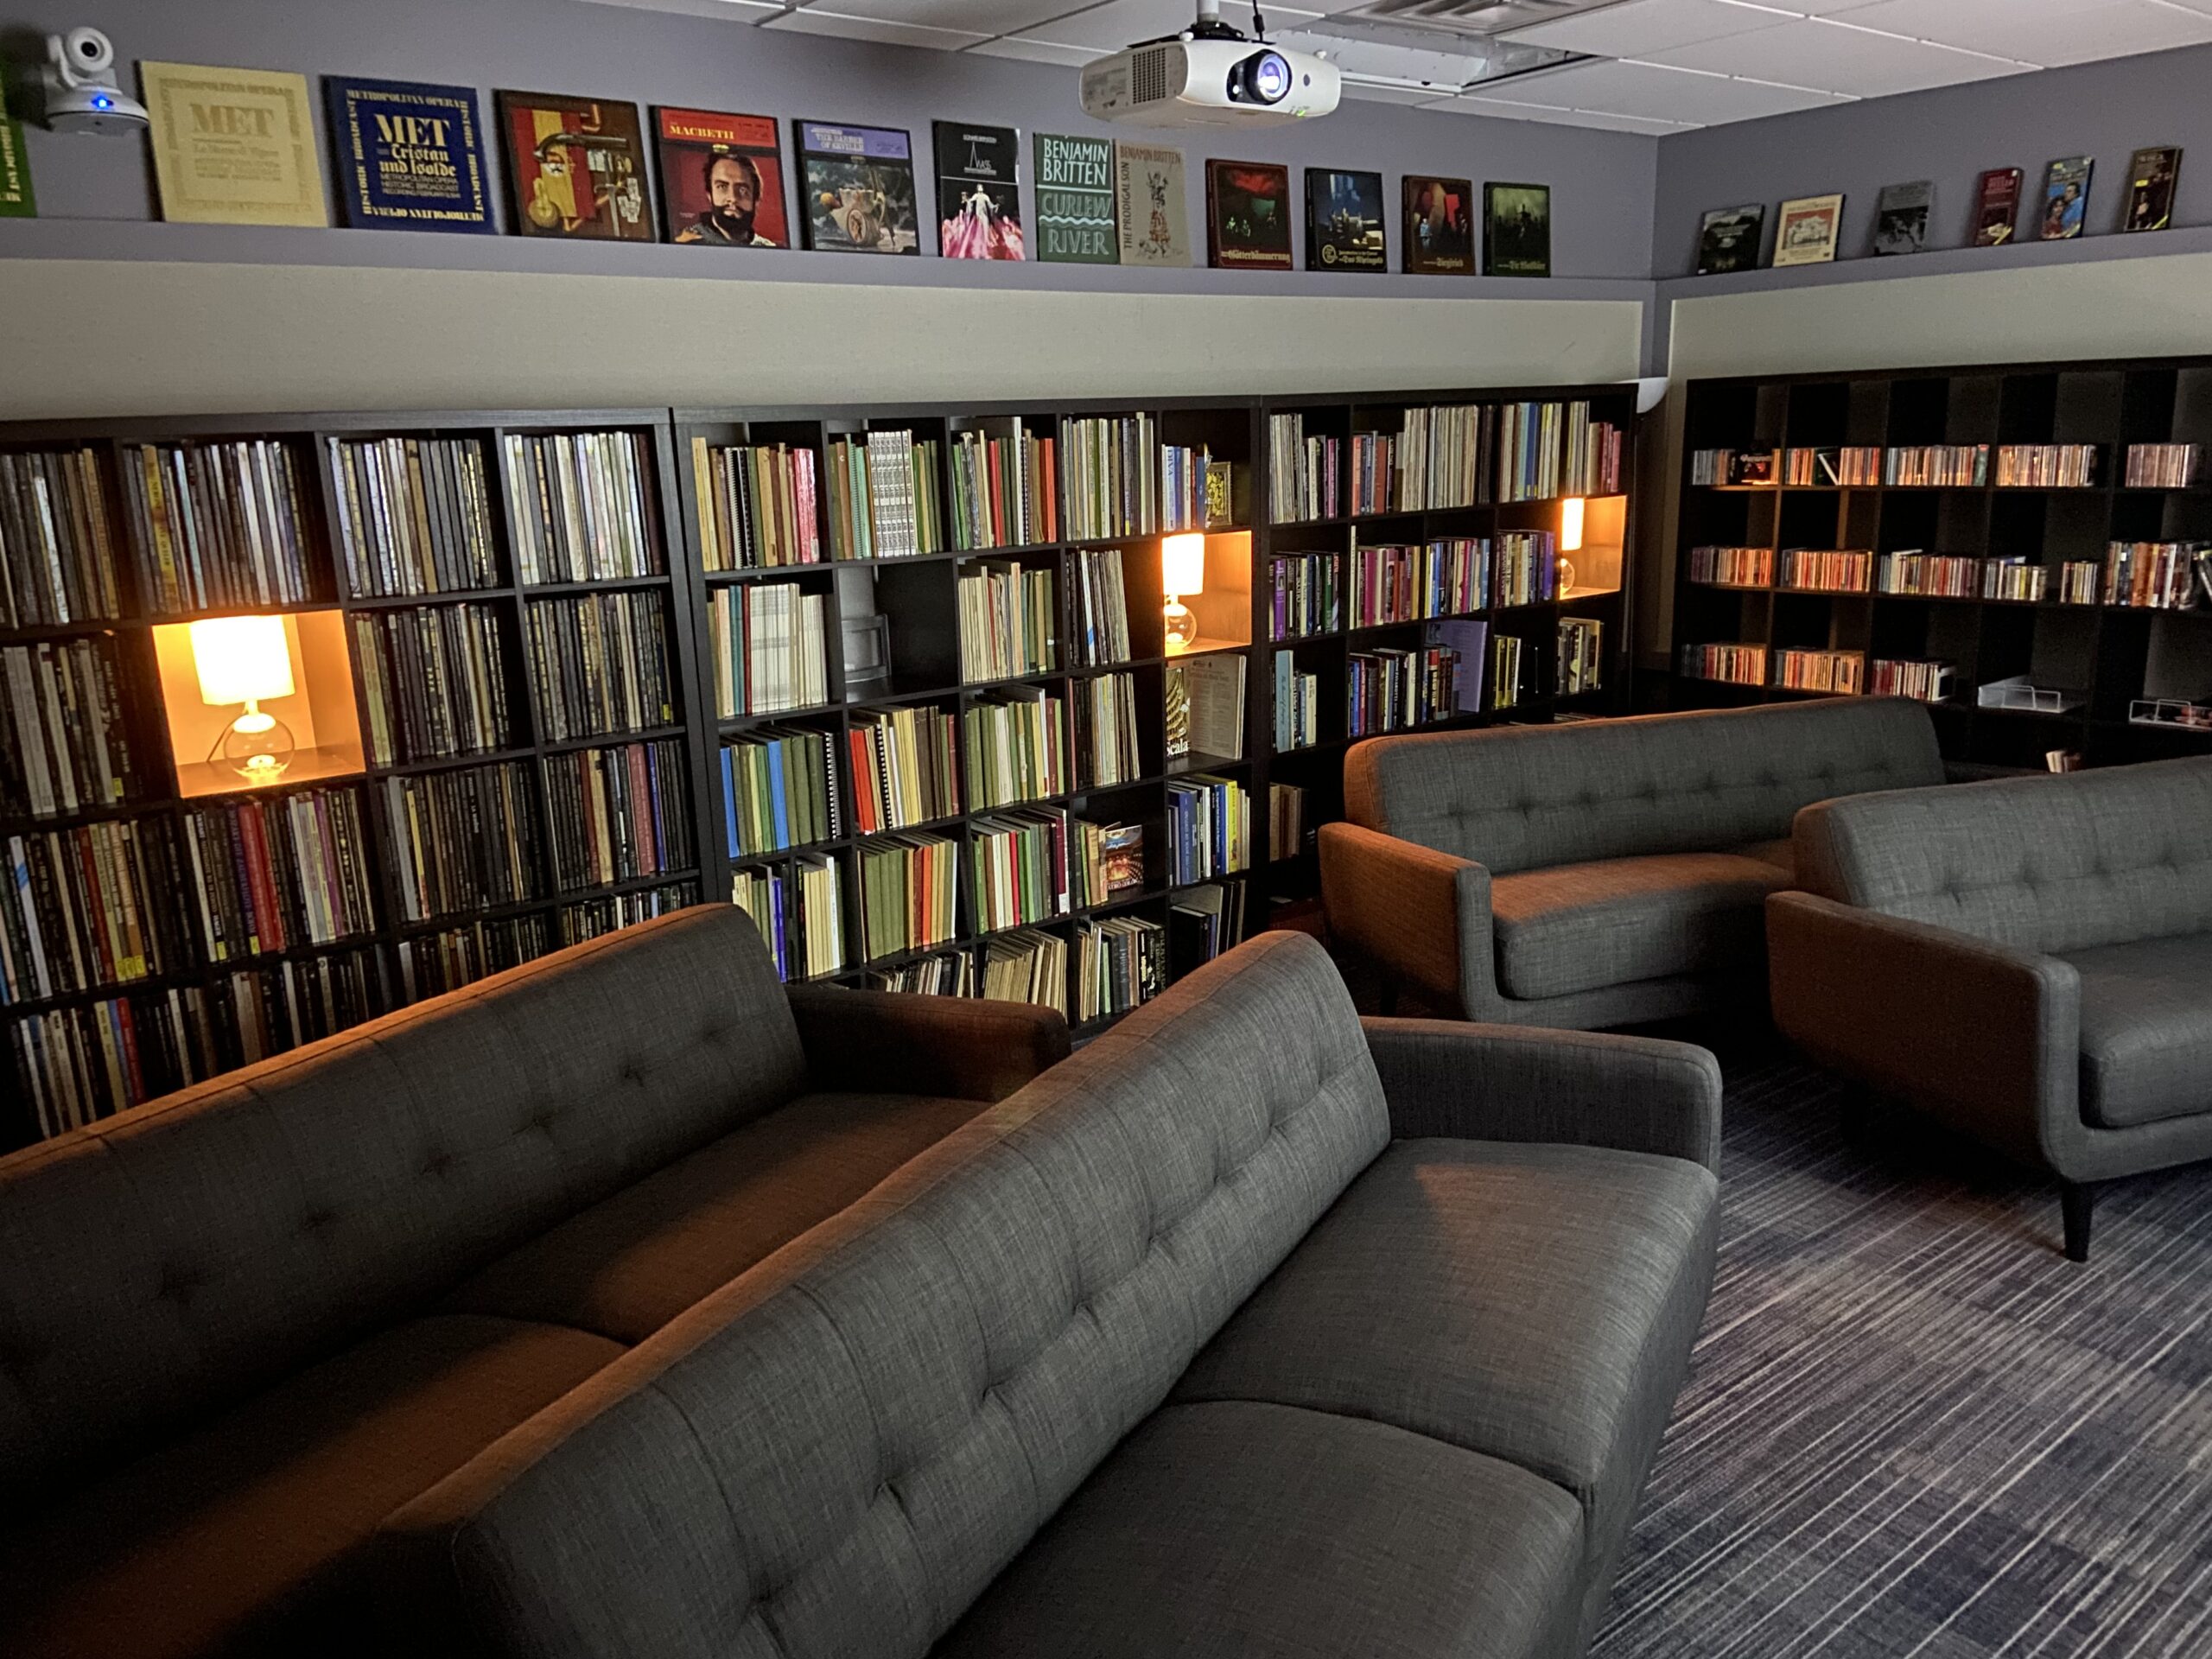 The Opera Media Center houses a collection of over 1,000 CDs, LPs, and DVDs generously donated by the Cusack family. 